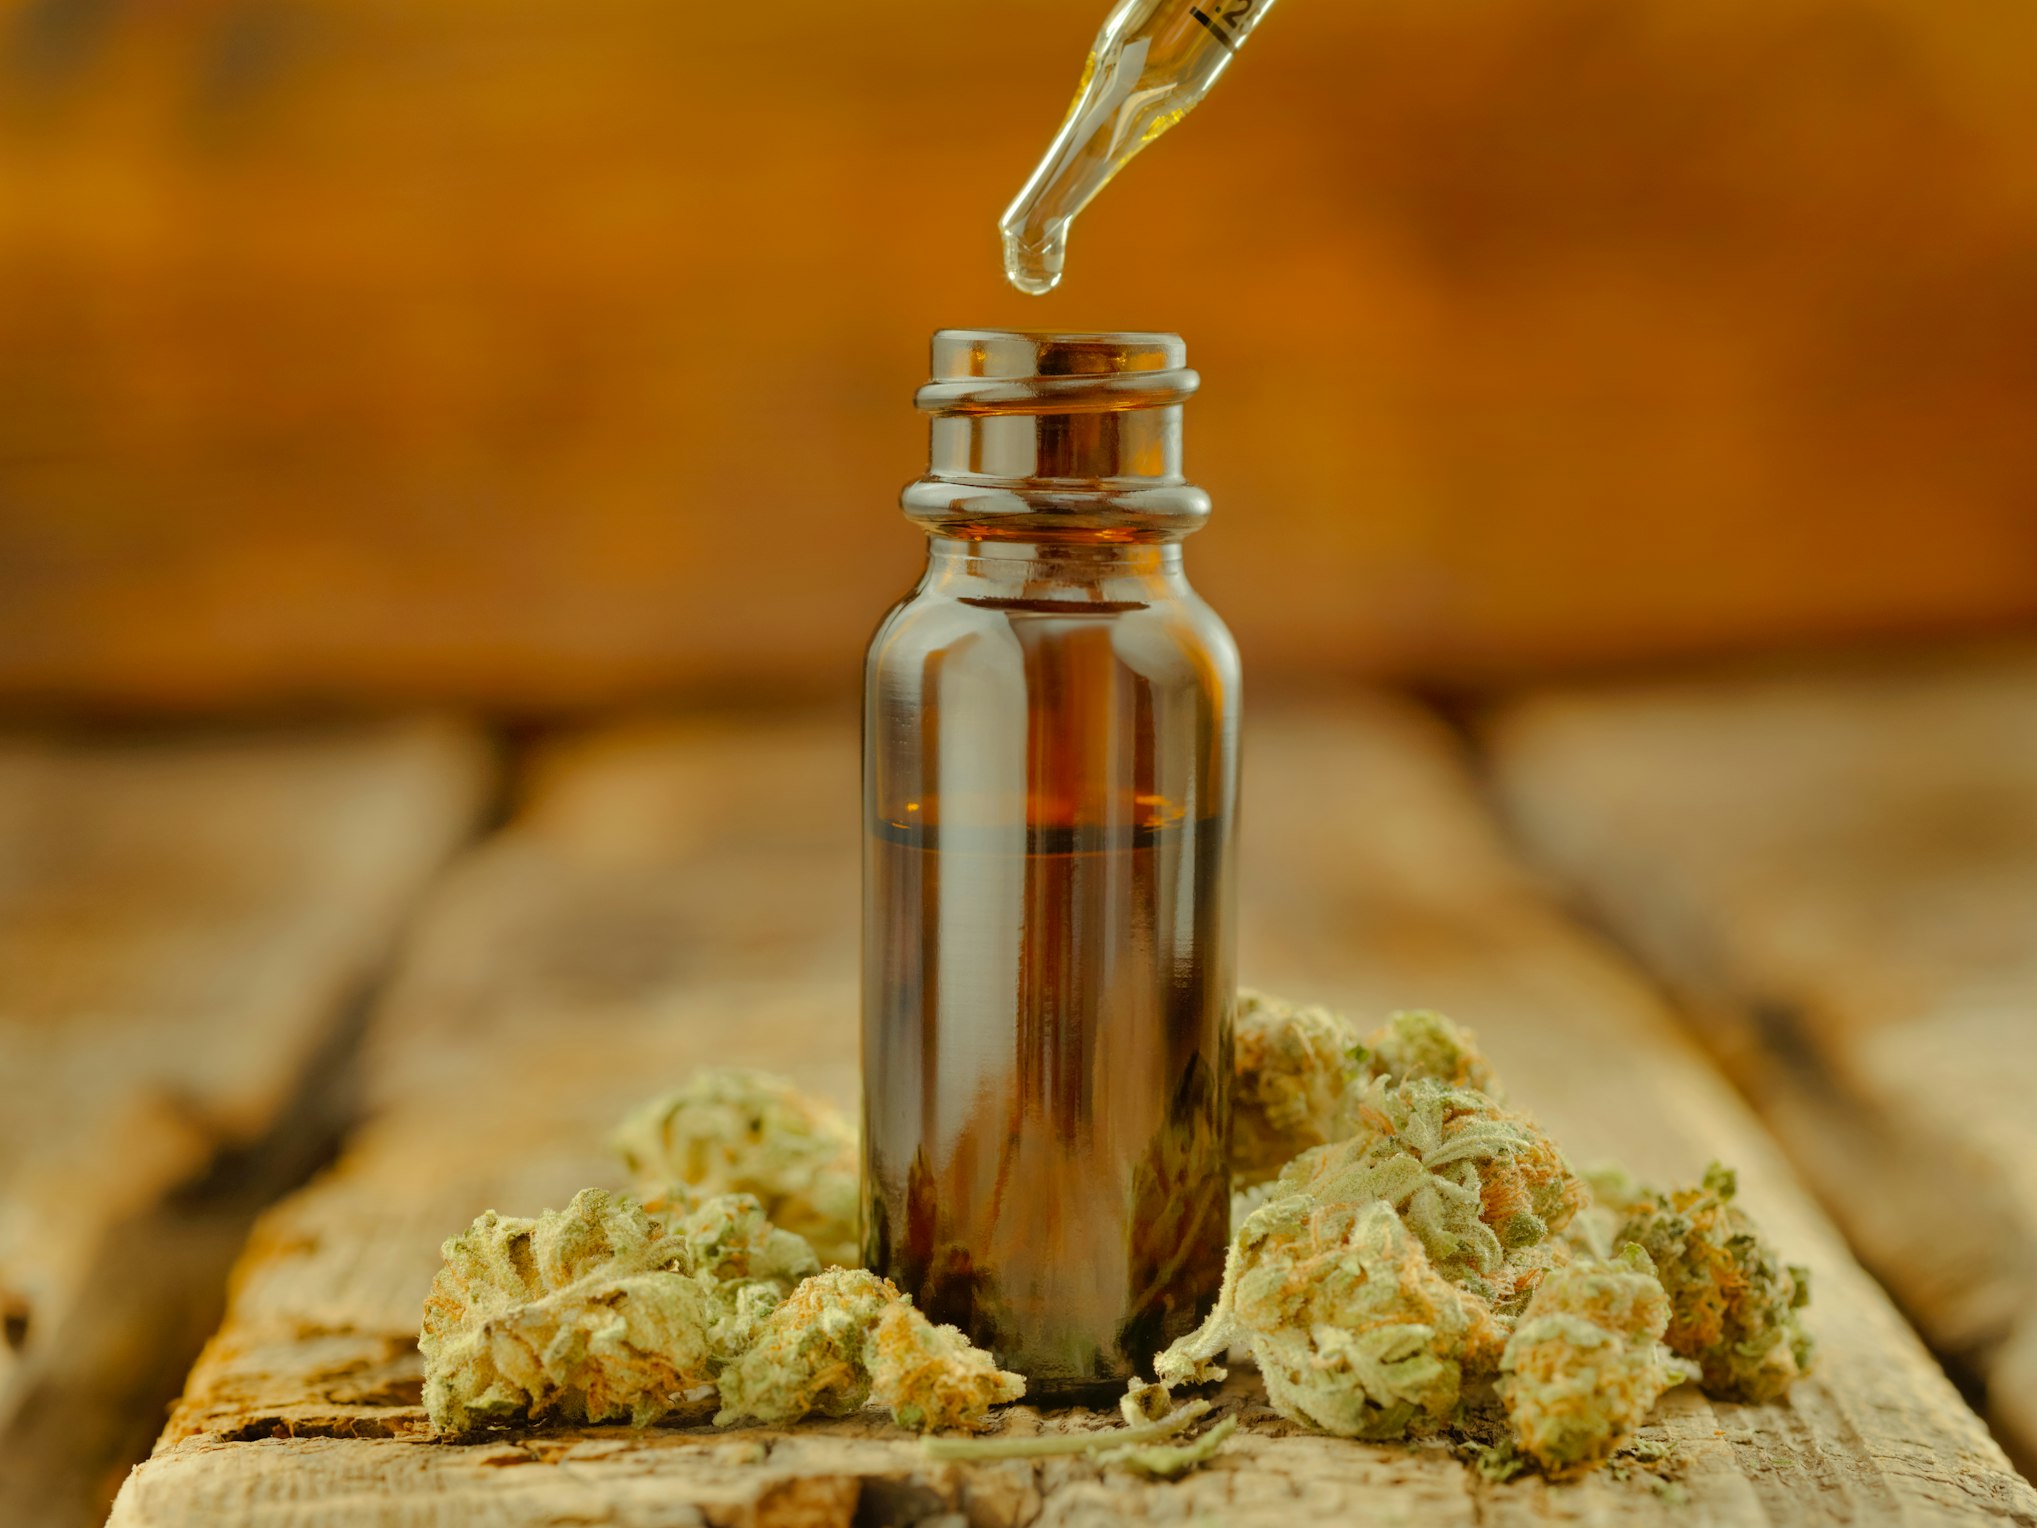 A comprehensive guide on how to take THC oil